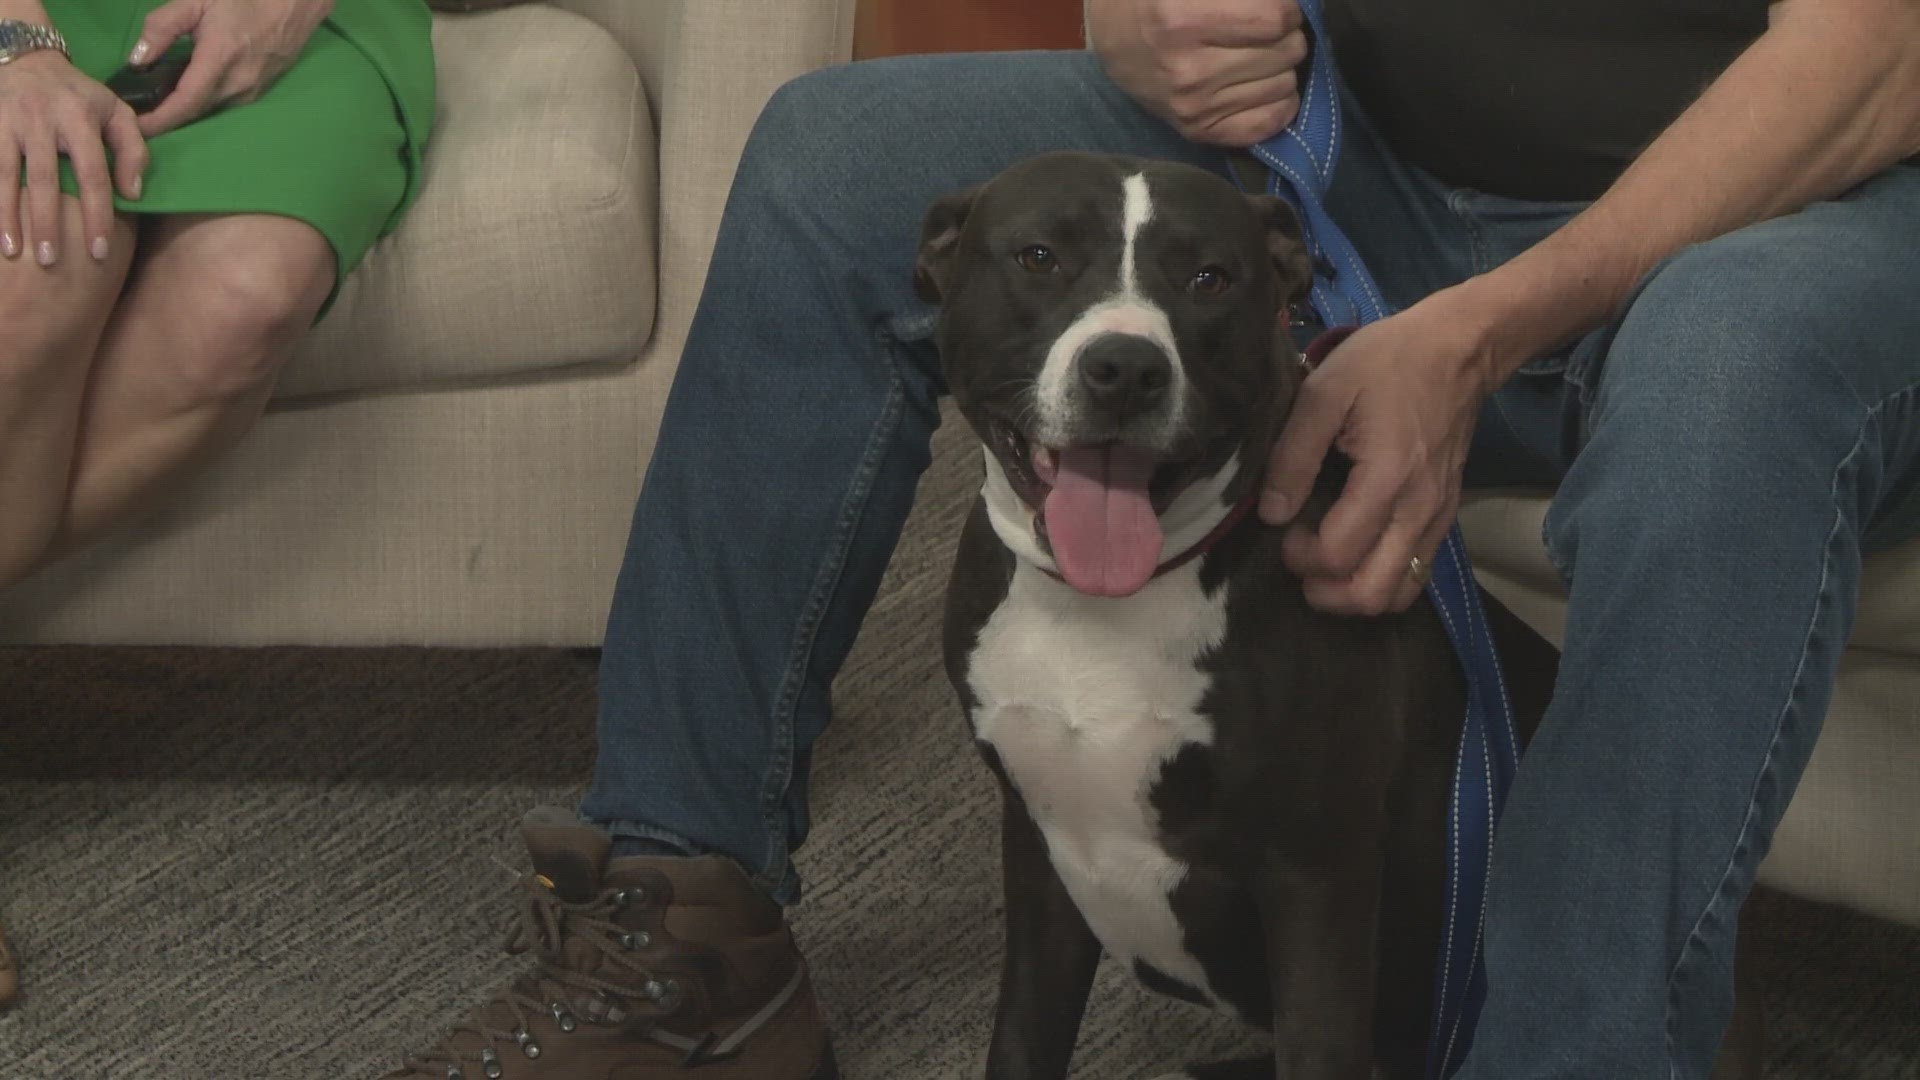 Steve Garcia with Austin Pets Alive! introduces us to Cleo, a snuggly, wiggly, loving girl looking for a forever home.